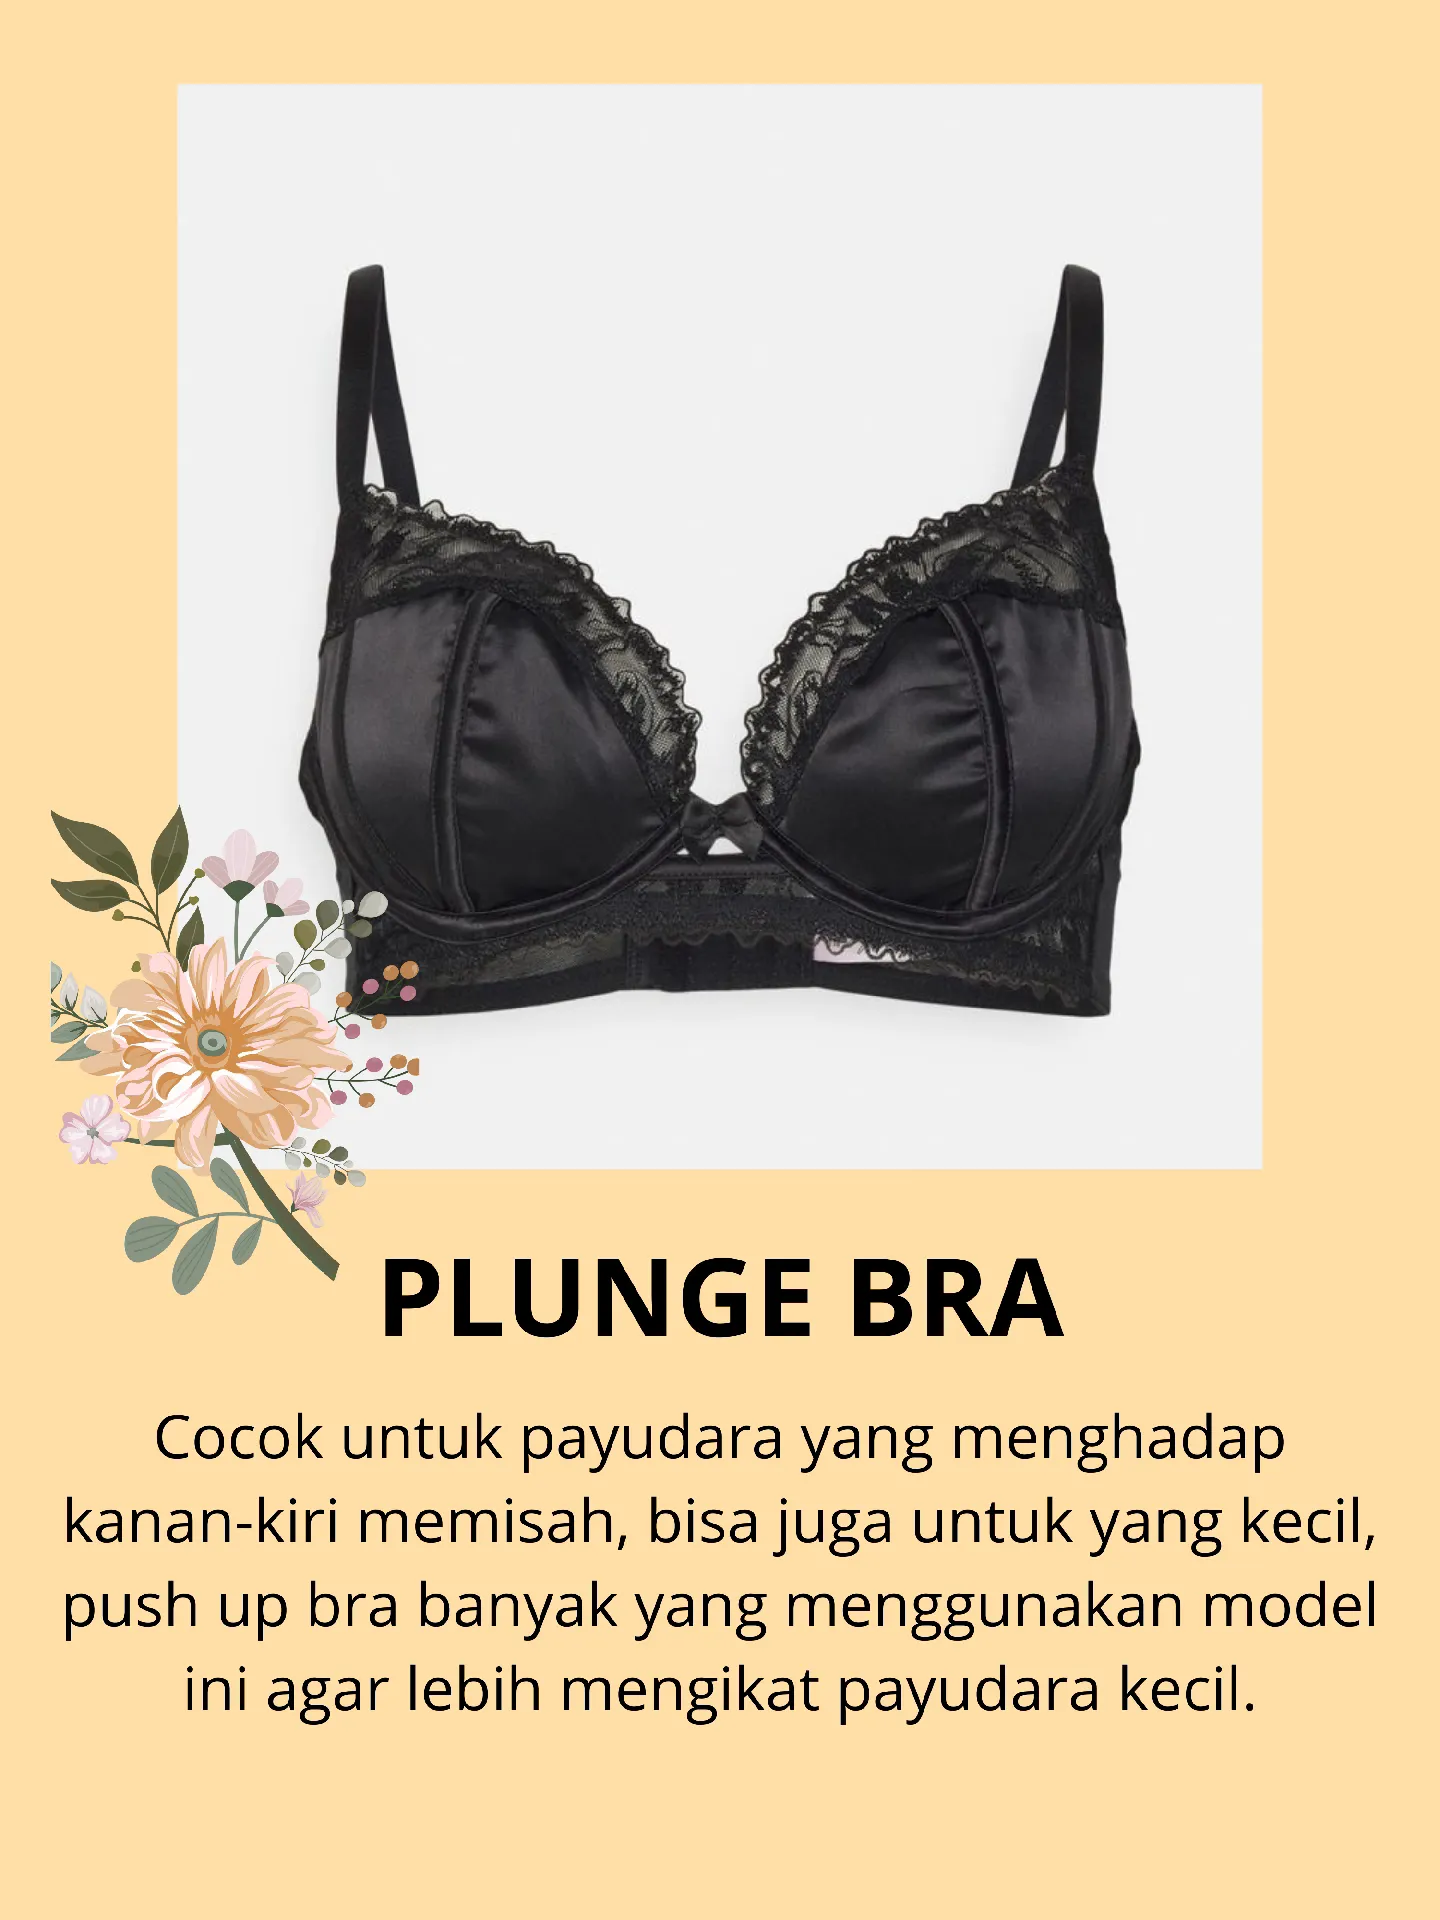 LOOKING FOR COMFY BRAS? READ THIS!